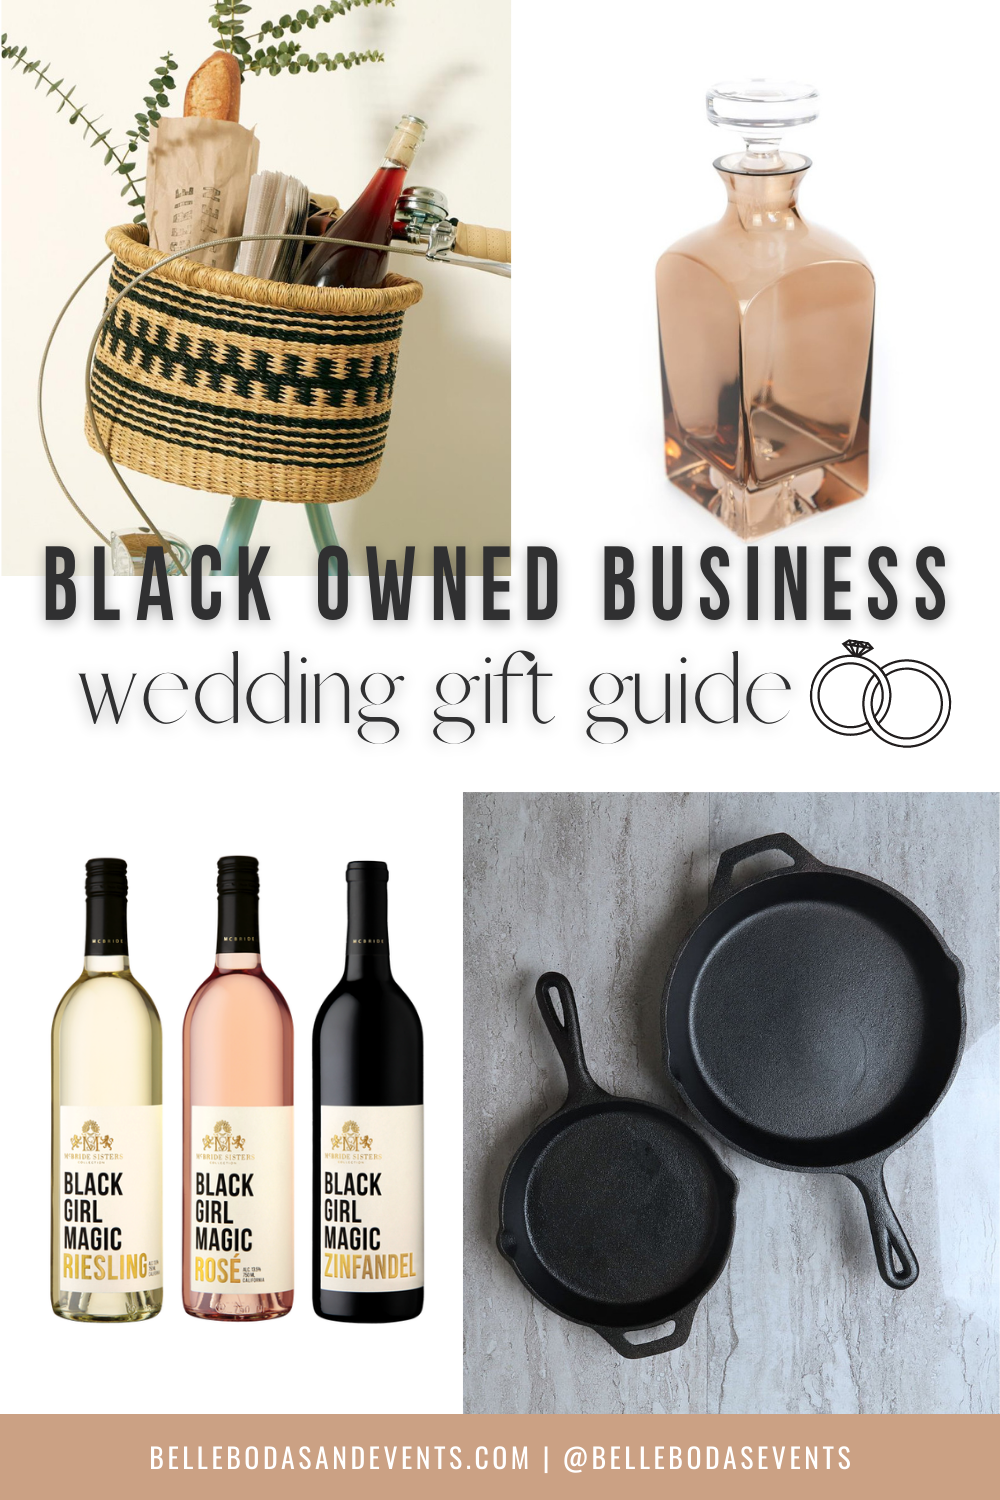 This Pinterest pin friendly image has the title "Black Owned Business - Wedding Gift Guide". It has 4 images of gifts we include in this gift guide. One is a black cast iron, another is a 3 bottles of wine (rose, zinfandel, and a white riesling), third is a hand woven basket for your bike and the fourth image is a amber colored glass canter.